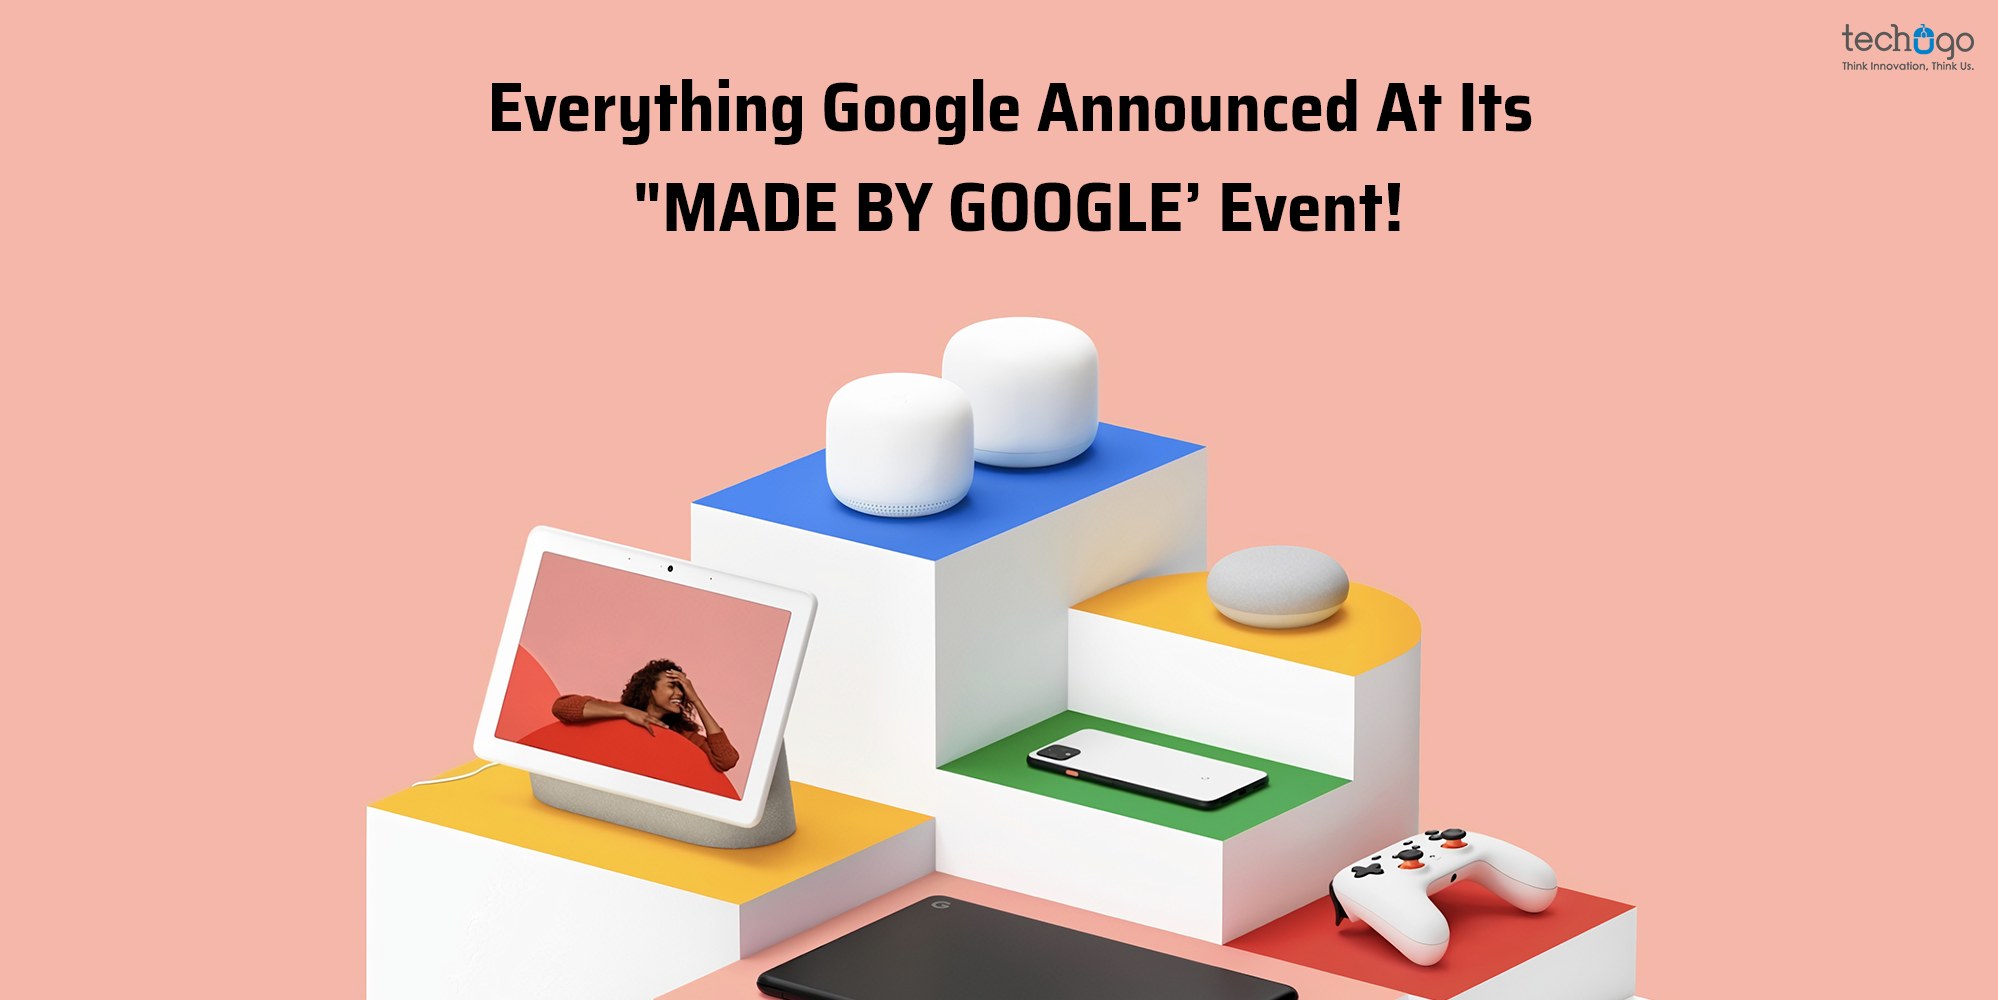 Everything Google Announced At Its “MADE BY GOOGLE’ Event!